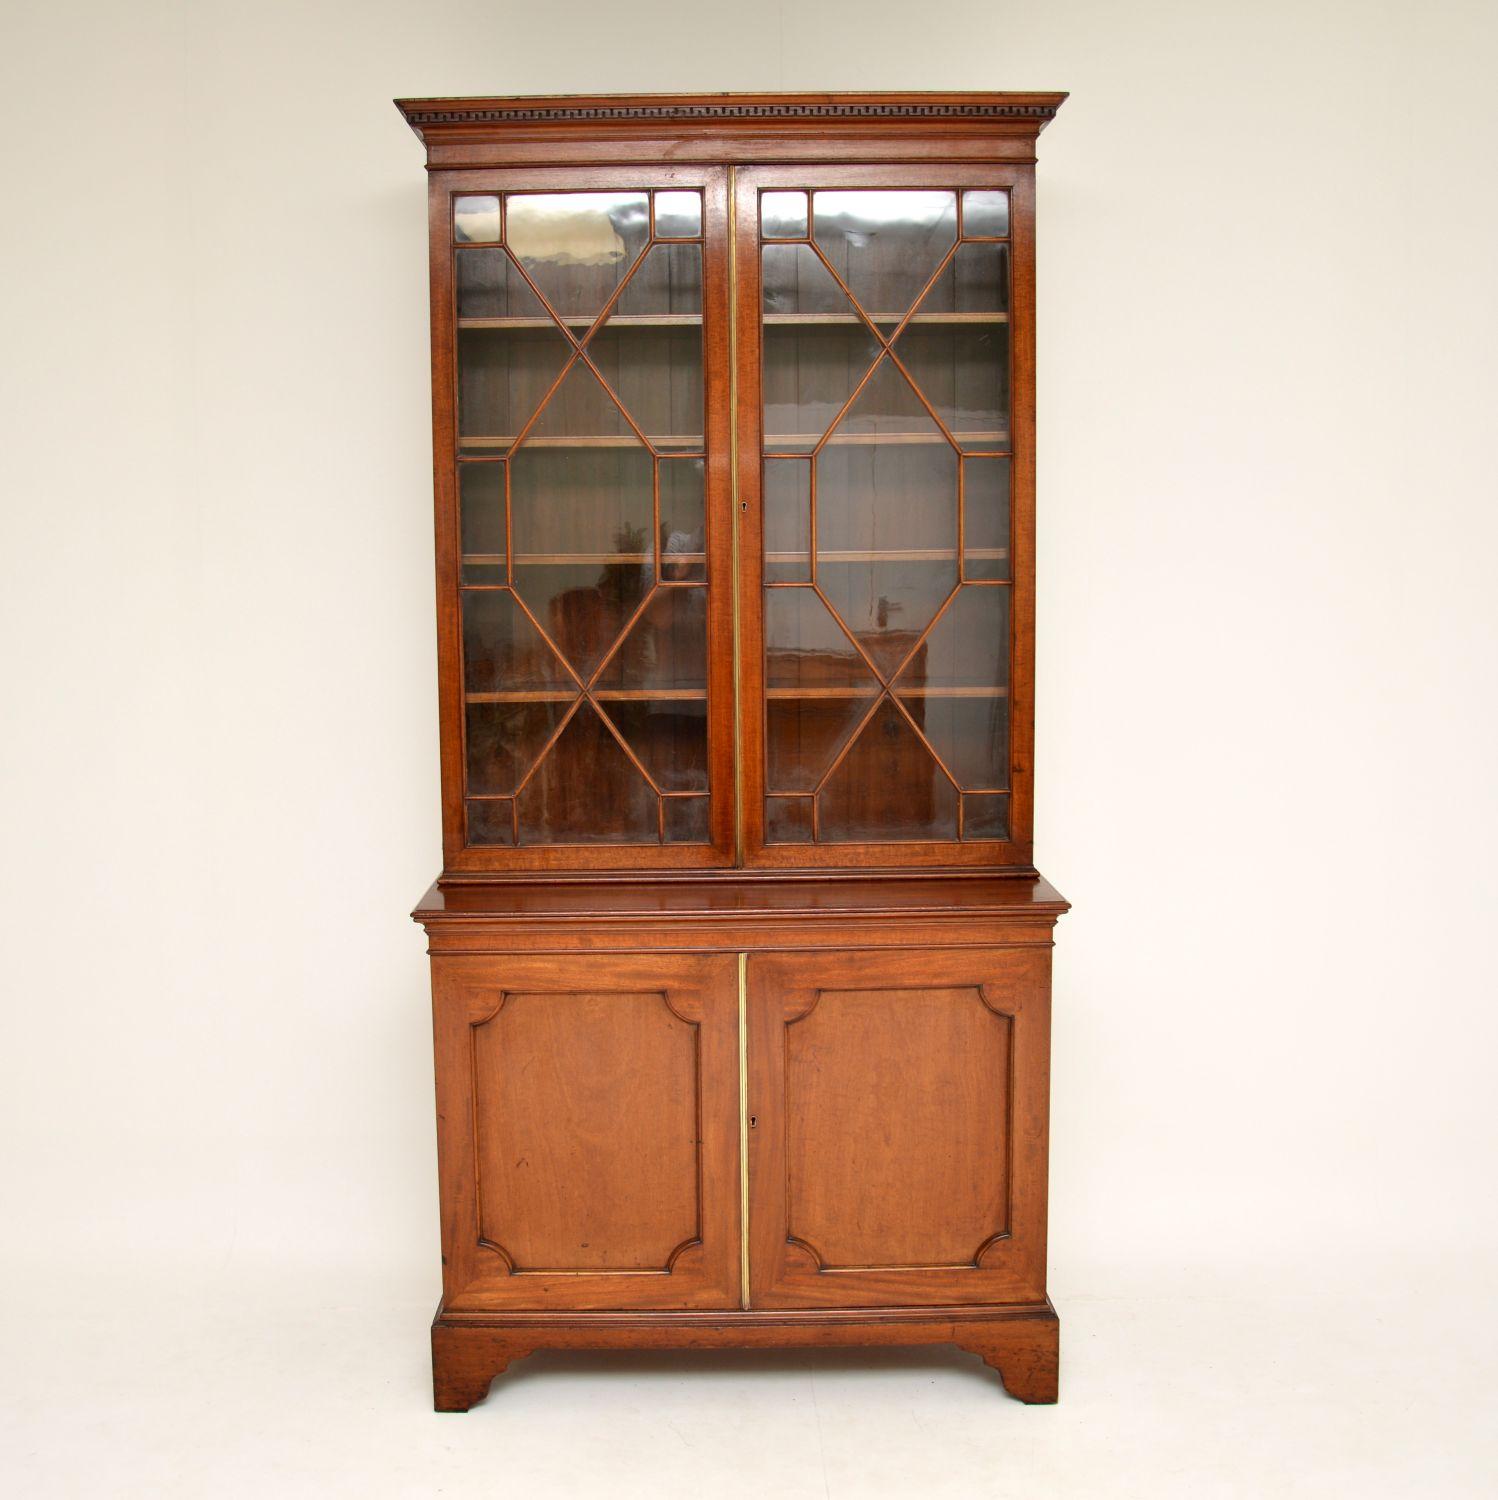 This antique George III period mahogany library bookcase is in excellent original condition & has had no repairs, just a polish. It’s also free from any splits, warps or woodworm & is of high quality.

The top cornice has a dental moulding & the